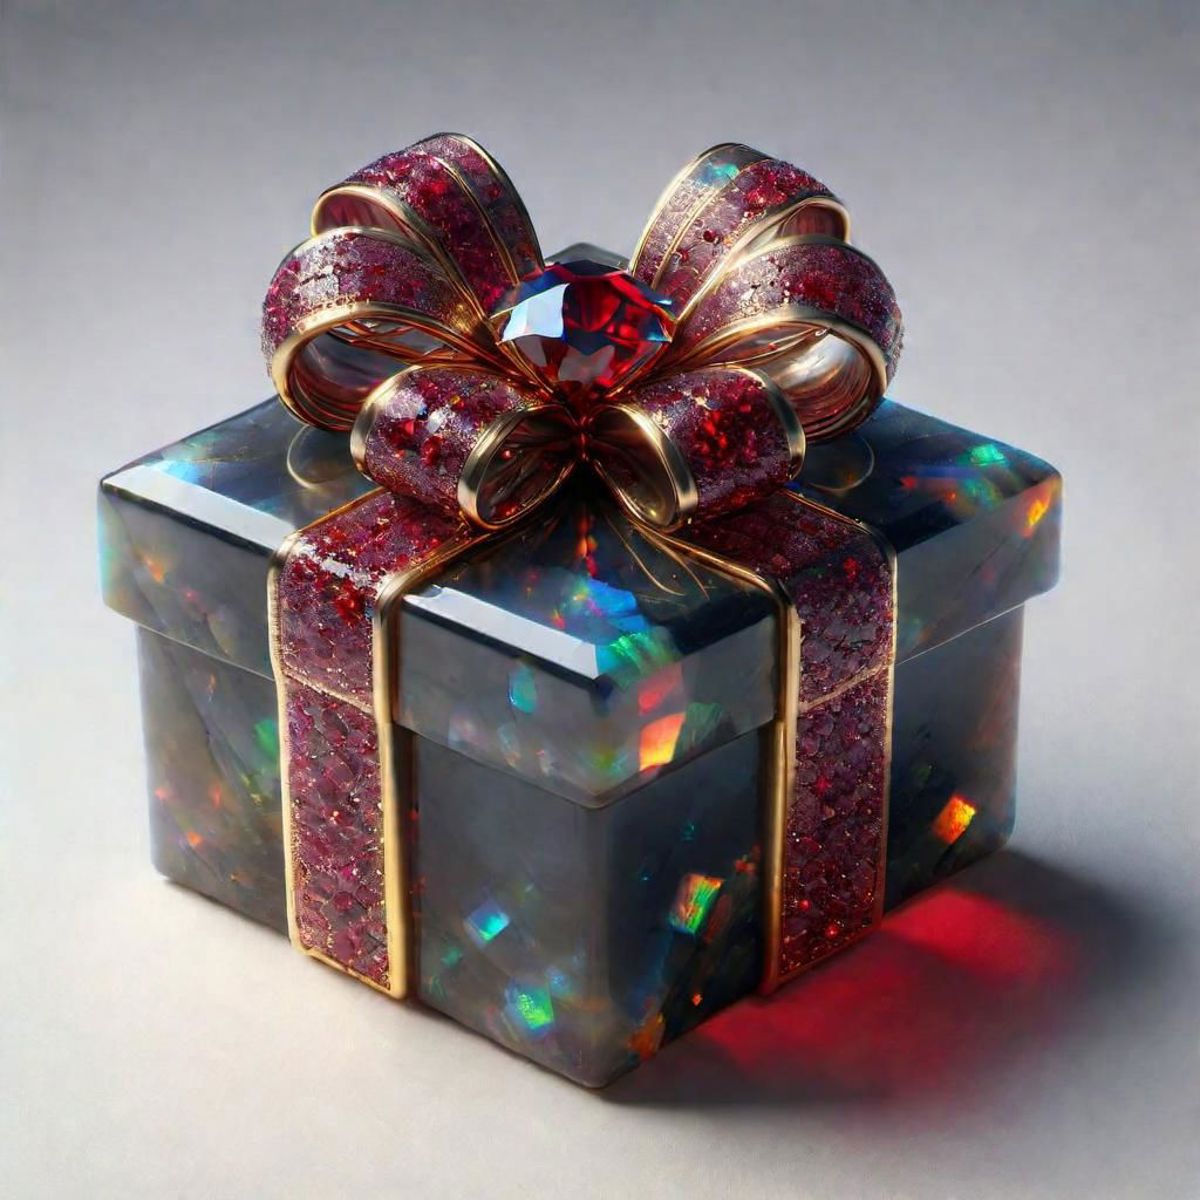 A Sparkly Gift Box with a Red Bow and Rainbow Decoration